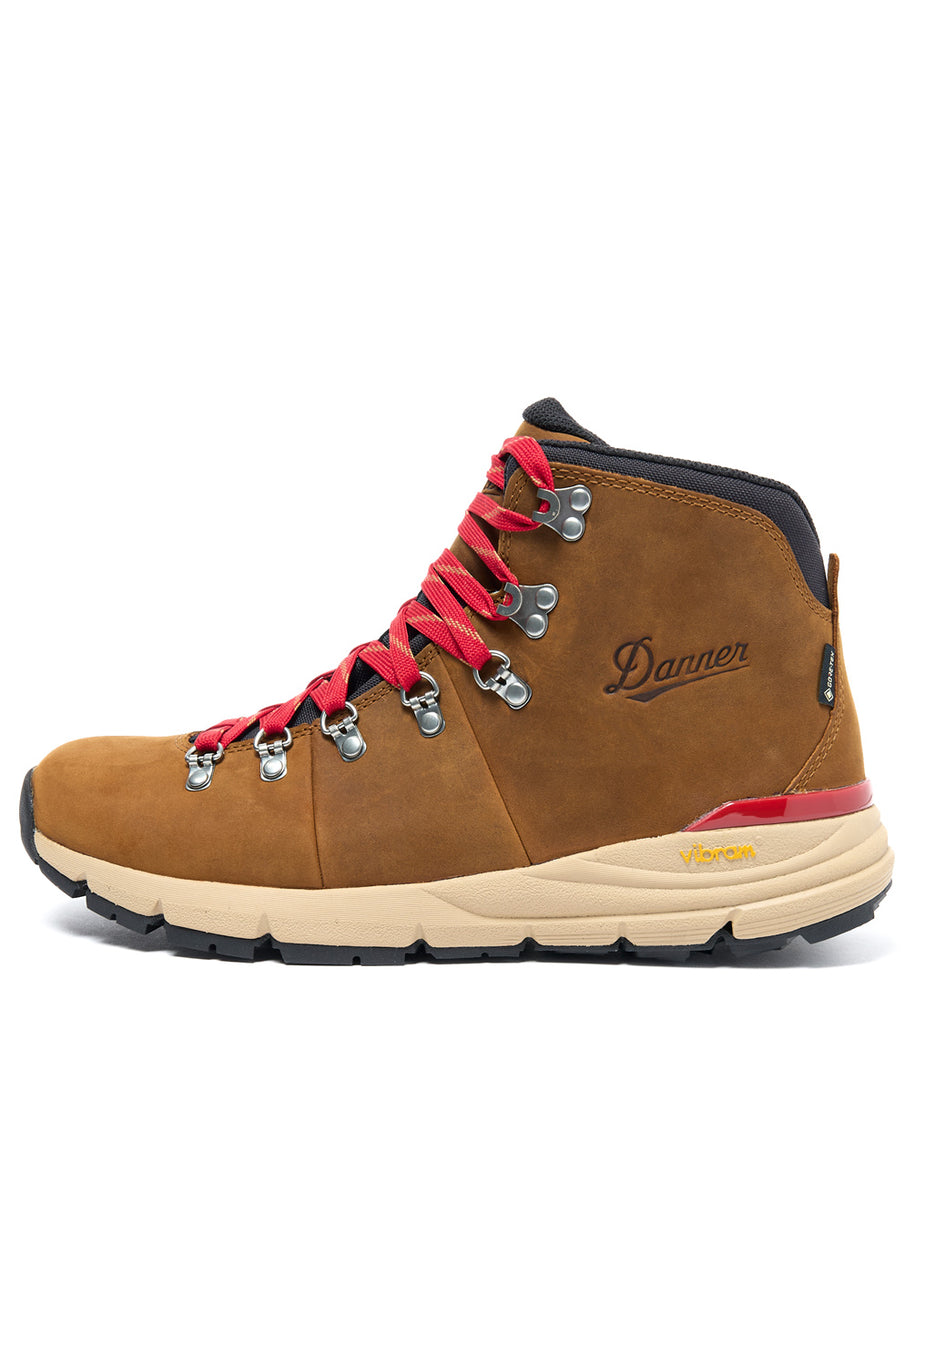 Danner Men's Mountain 600 Leaf 4.5" GTX Boots - Grizzly Brown / Rhodo Red